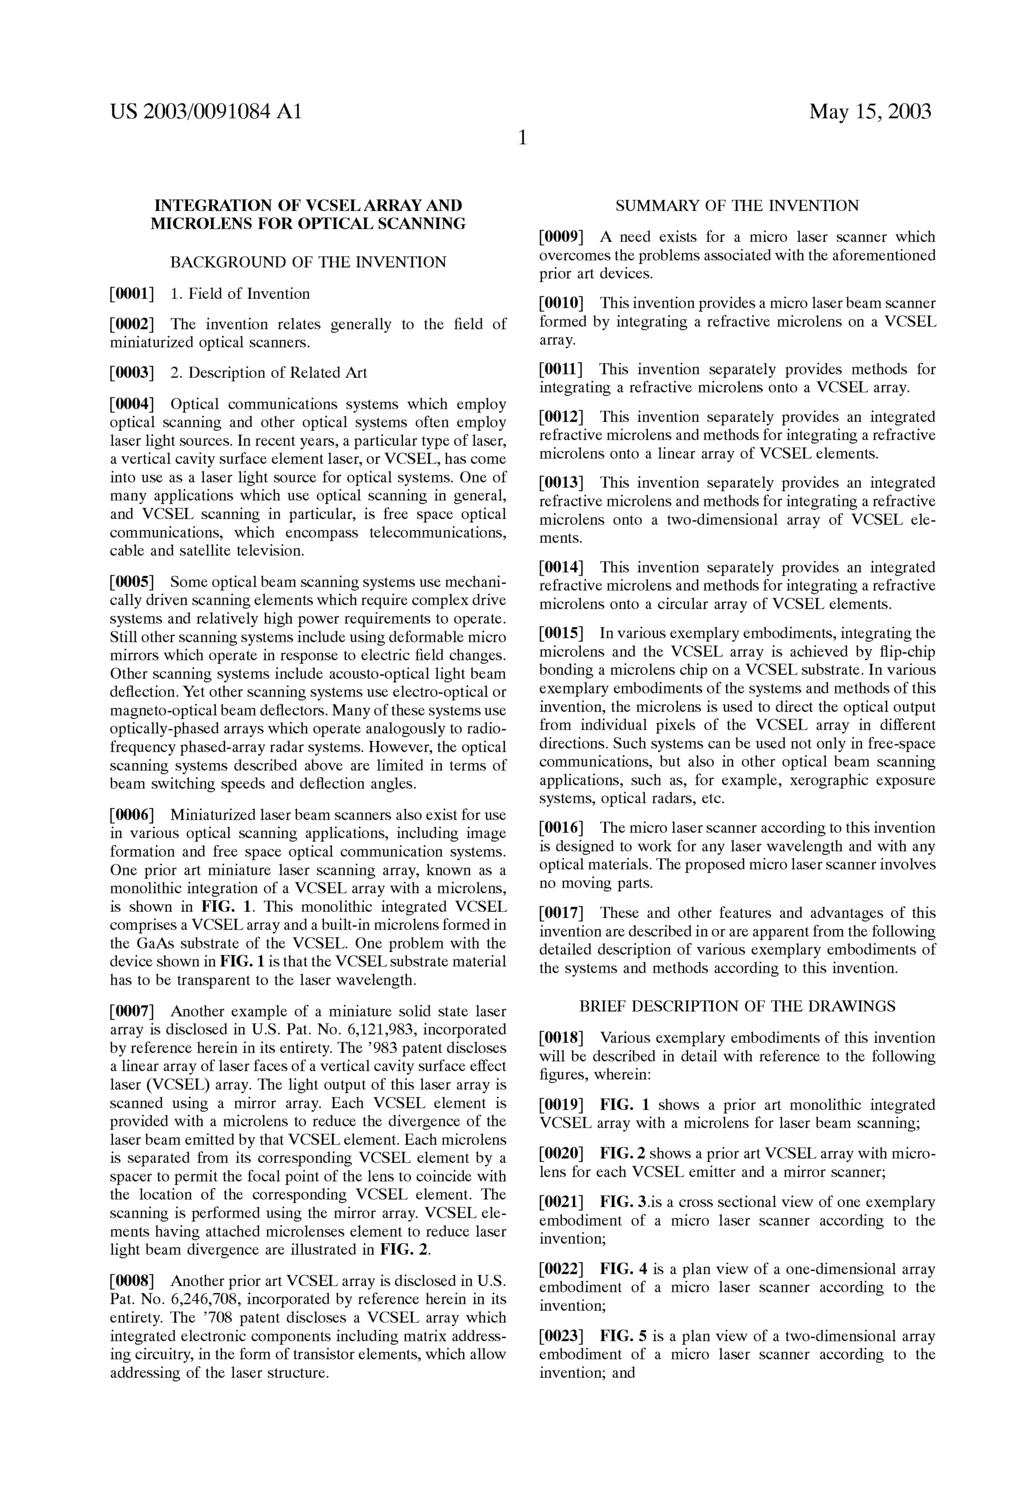 US 2003/0091084A1 May 15, 2003 INTEGRATION OF VCSEL ARRAY AND MICROLENS FOR OPTICAL SCANNING BACKGROUND OF THE INVENTION 0001) 1.